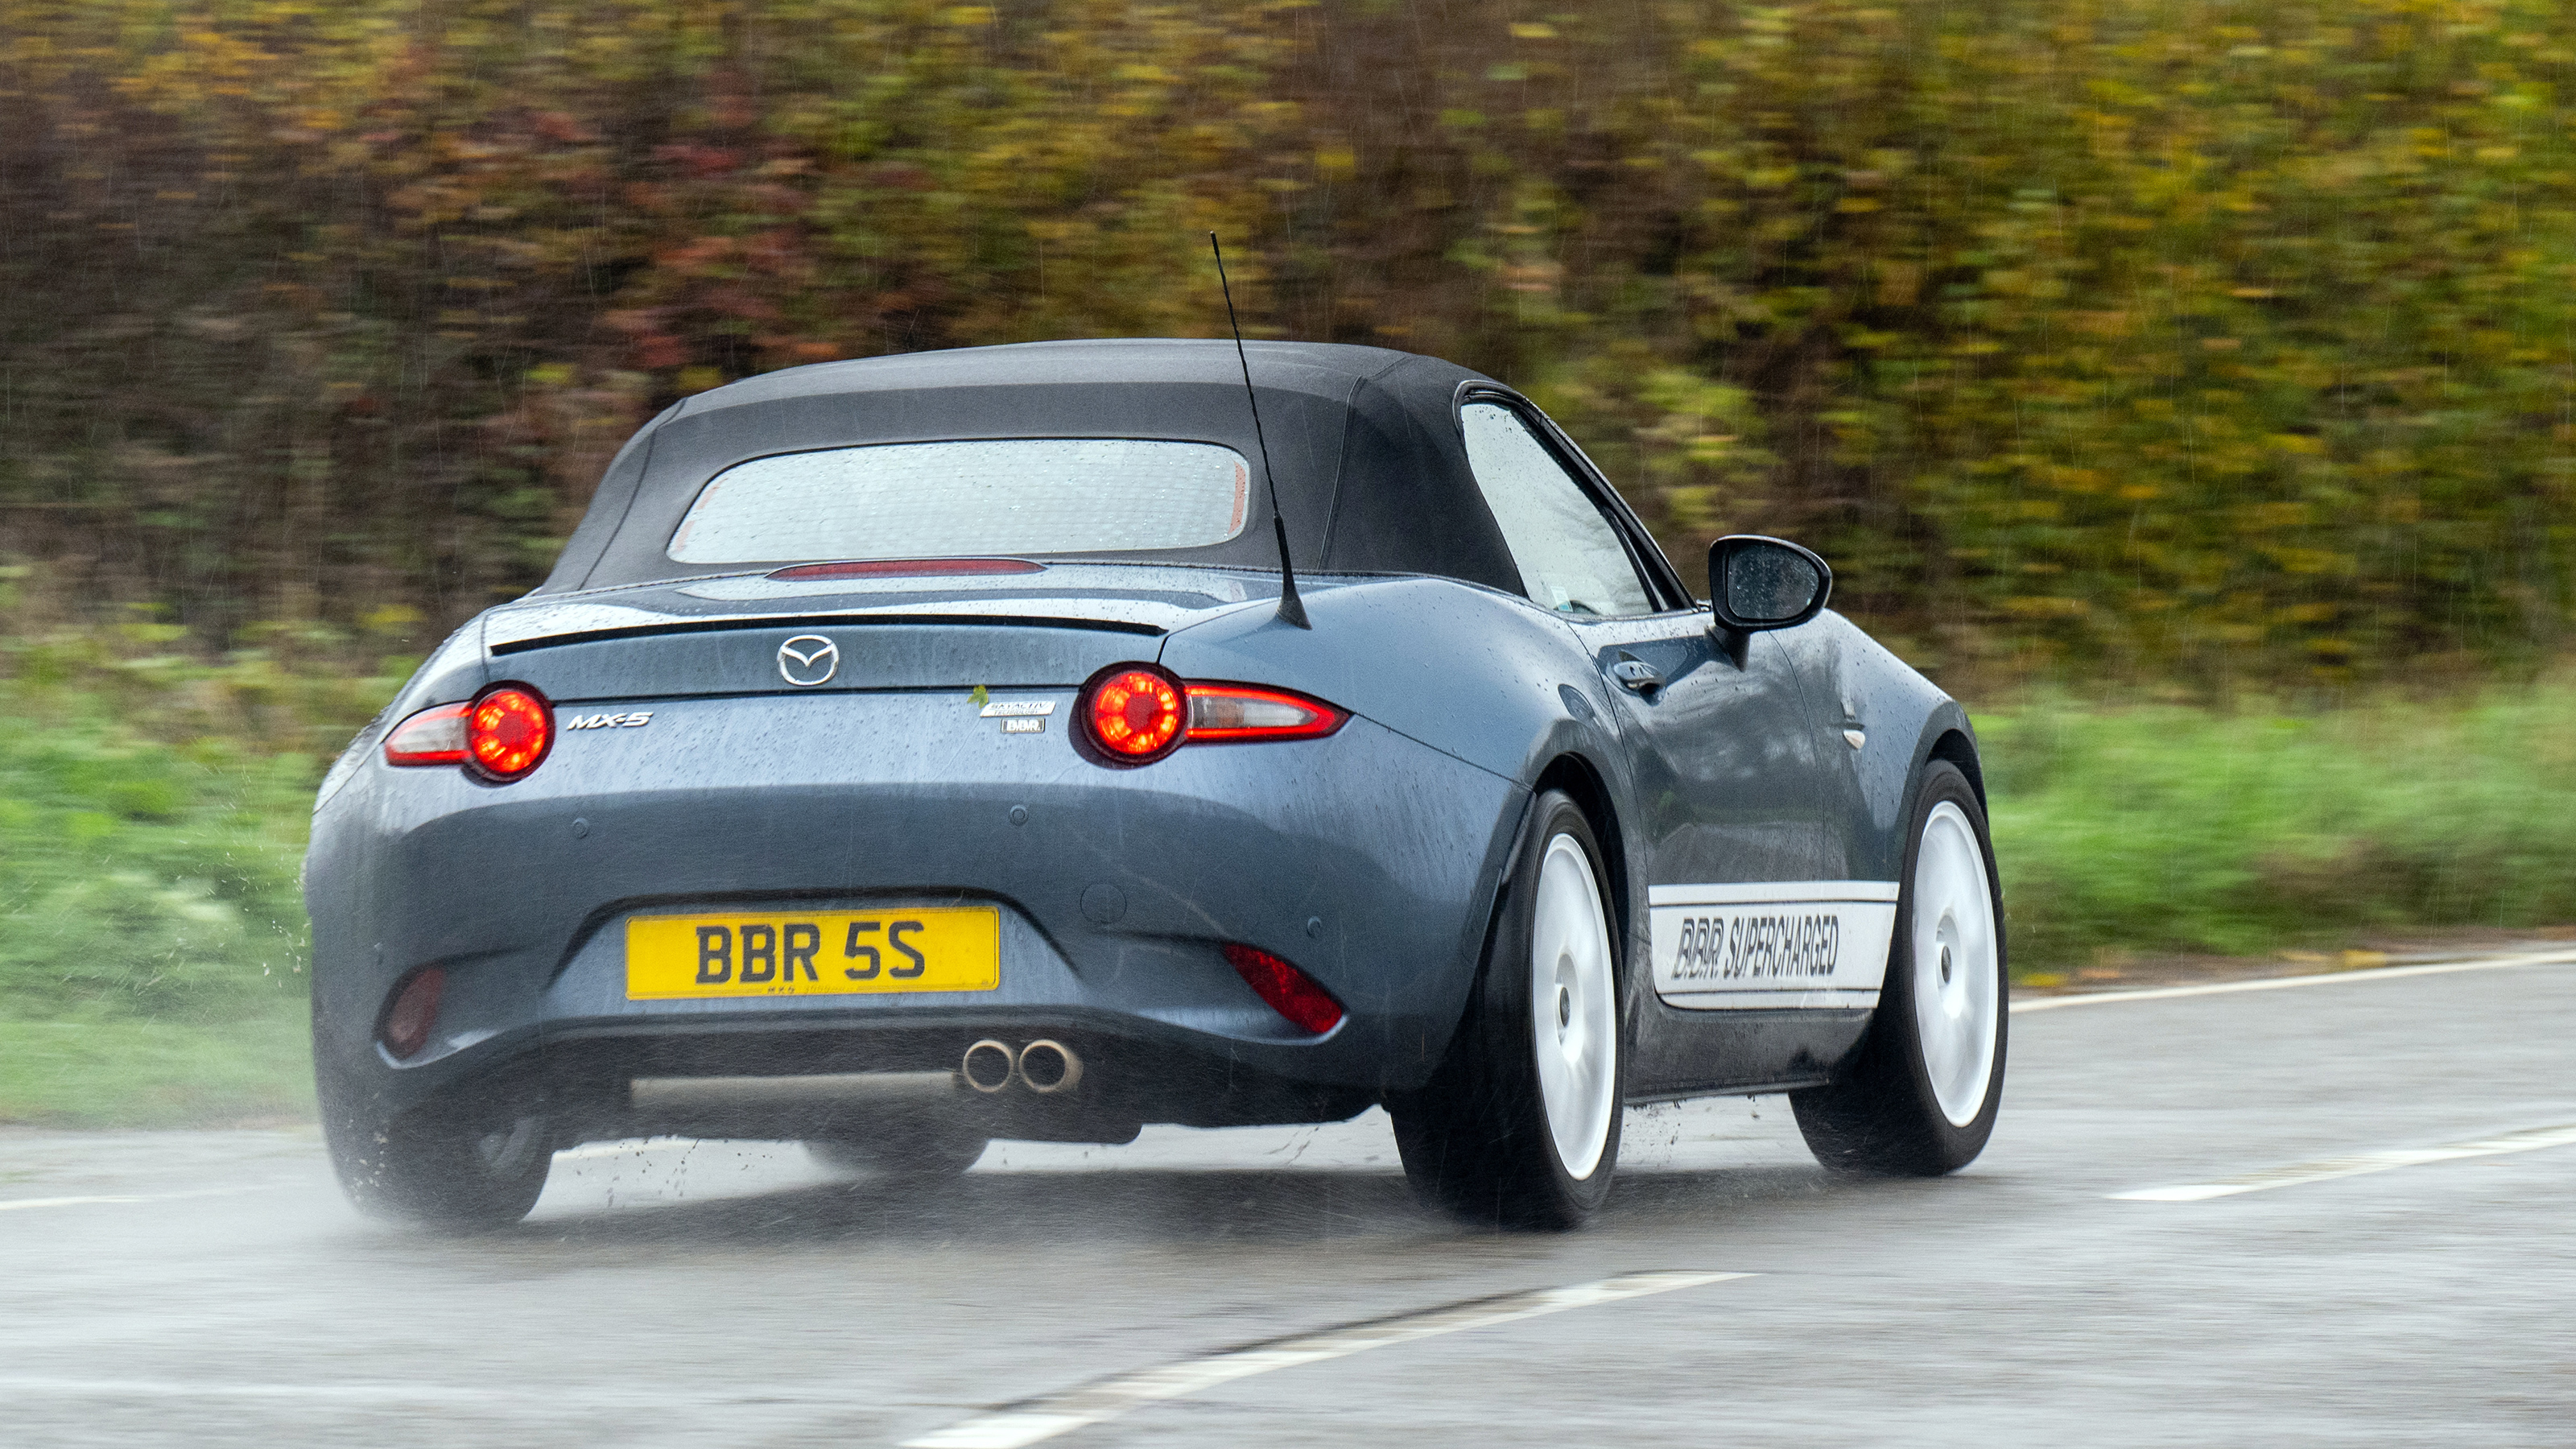 BBR Supercharged Mazda MX-5 (ND) 2023 review – tuned 250bhp roadster driven